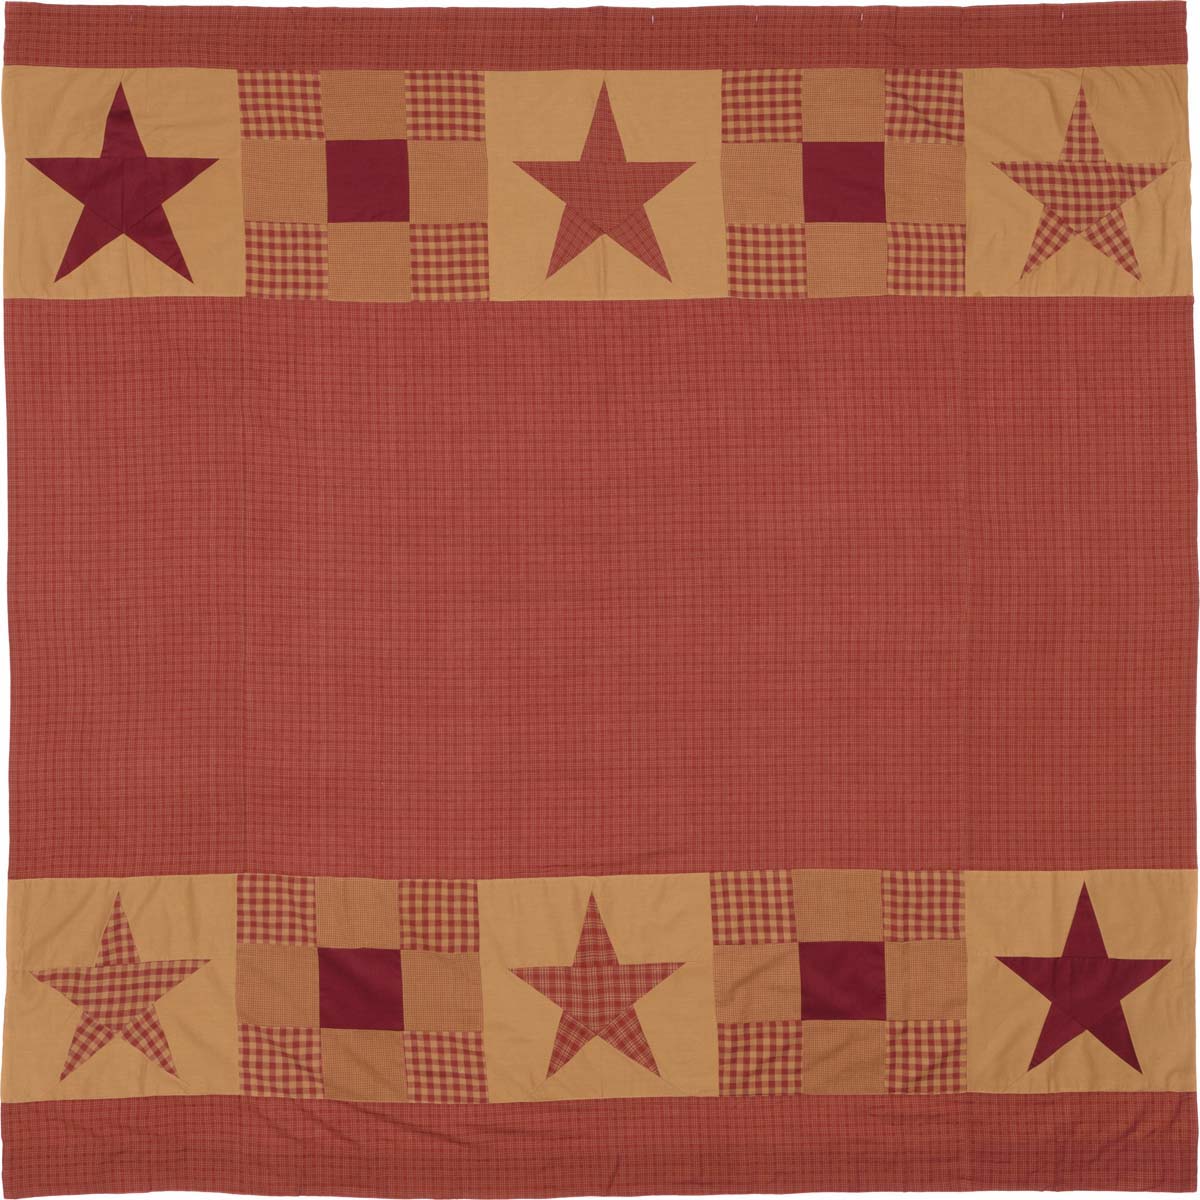 Mayflower Market Ninepatch Star Shower Curtain w/ Patchwork Borders 72x72 By VHC Brands